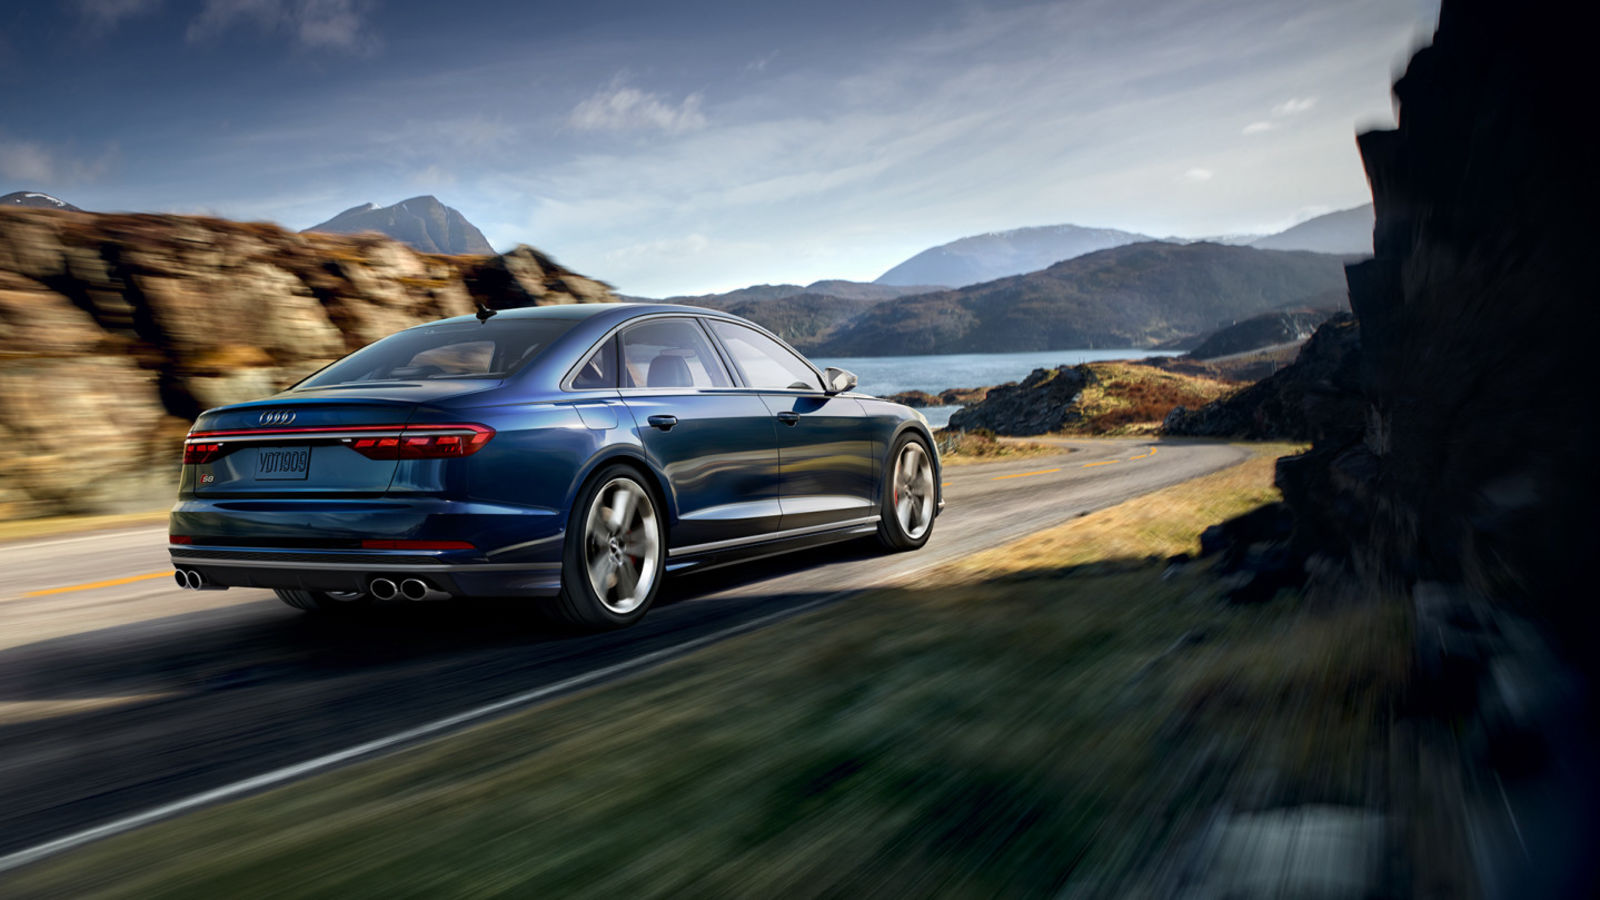 Illustration for article titled The 2020 Audi S8 starts at $129,500